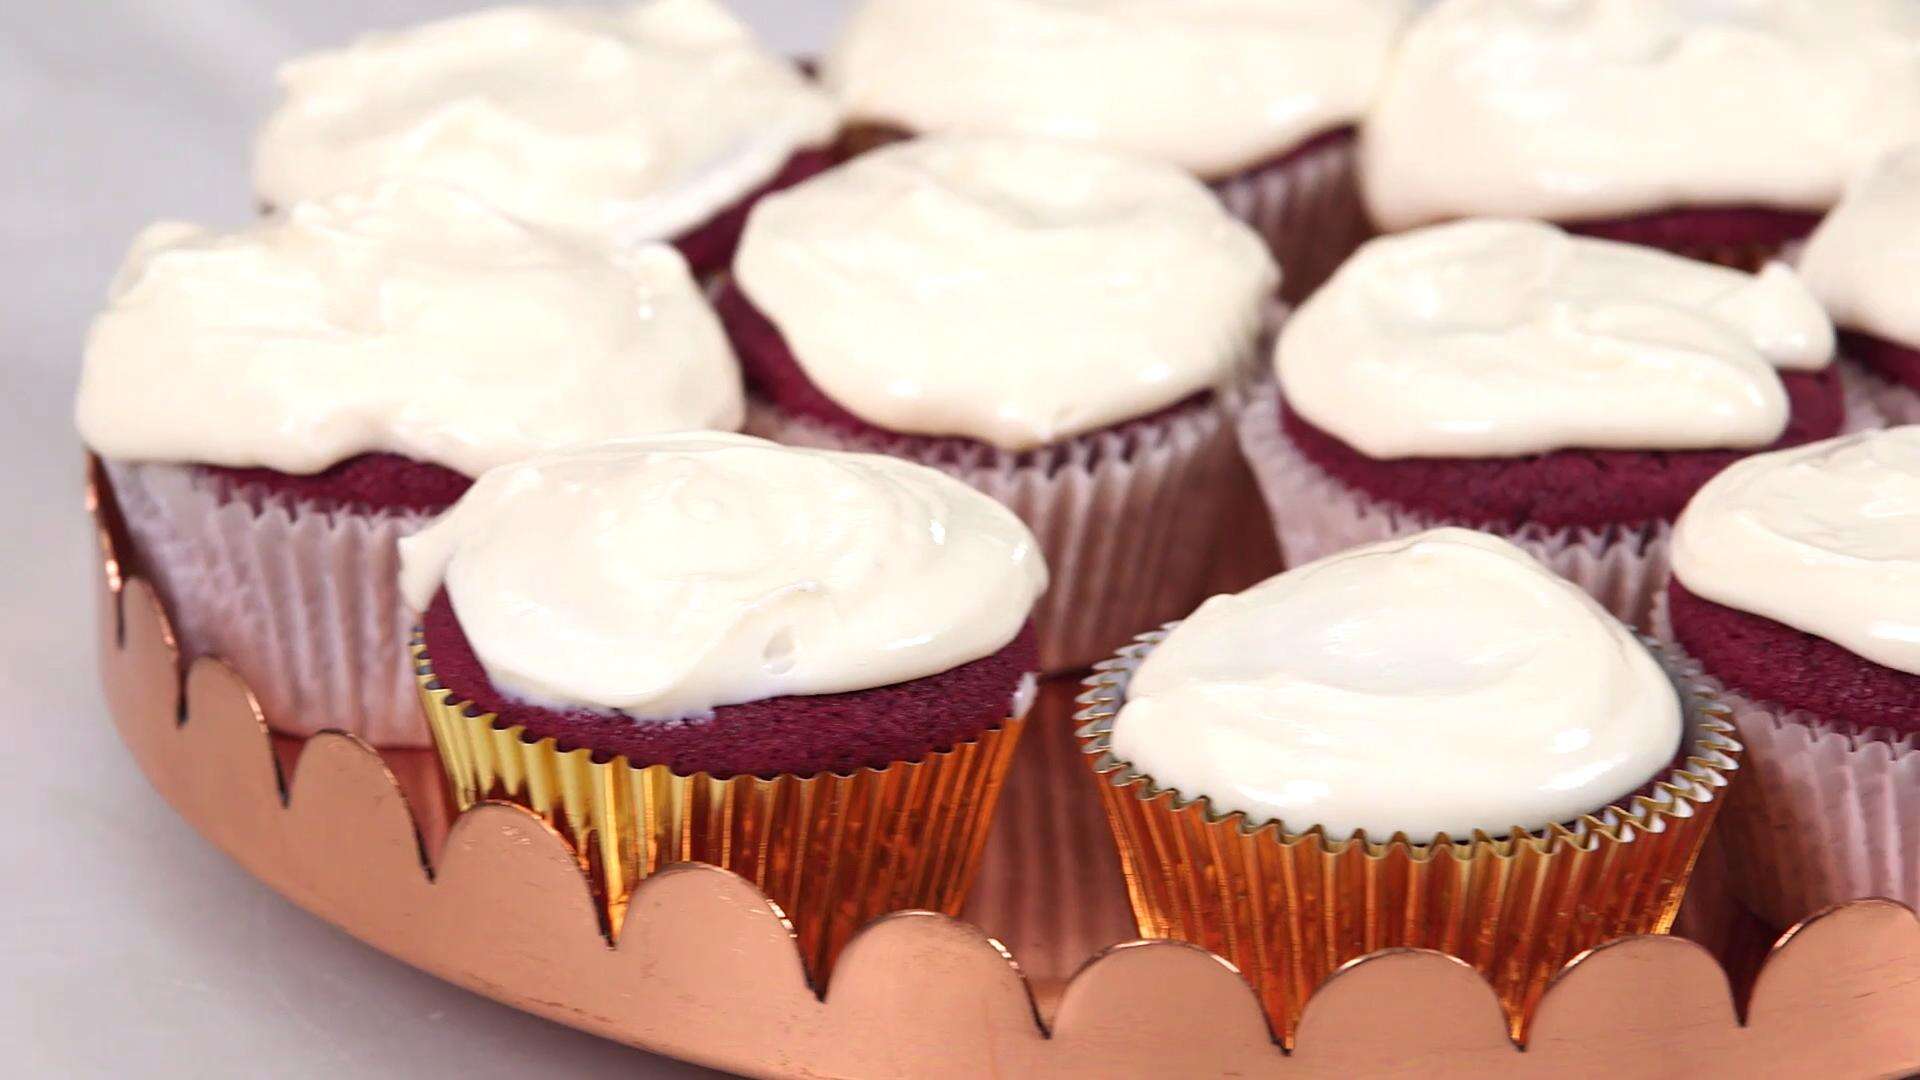 How To Make Red Velvet Beet Cupcakes Cooking Light